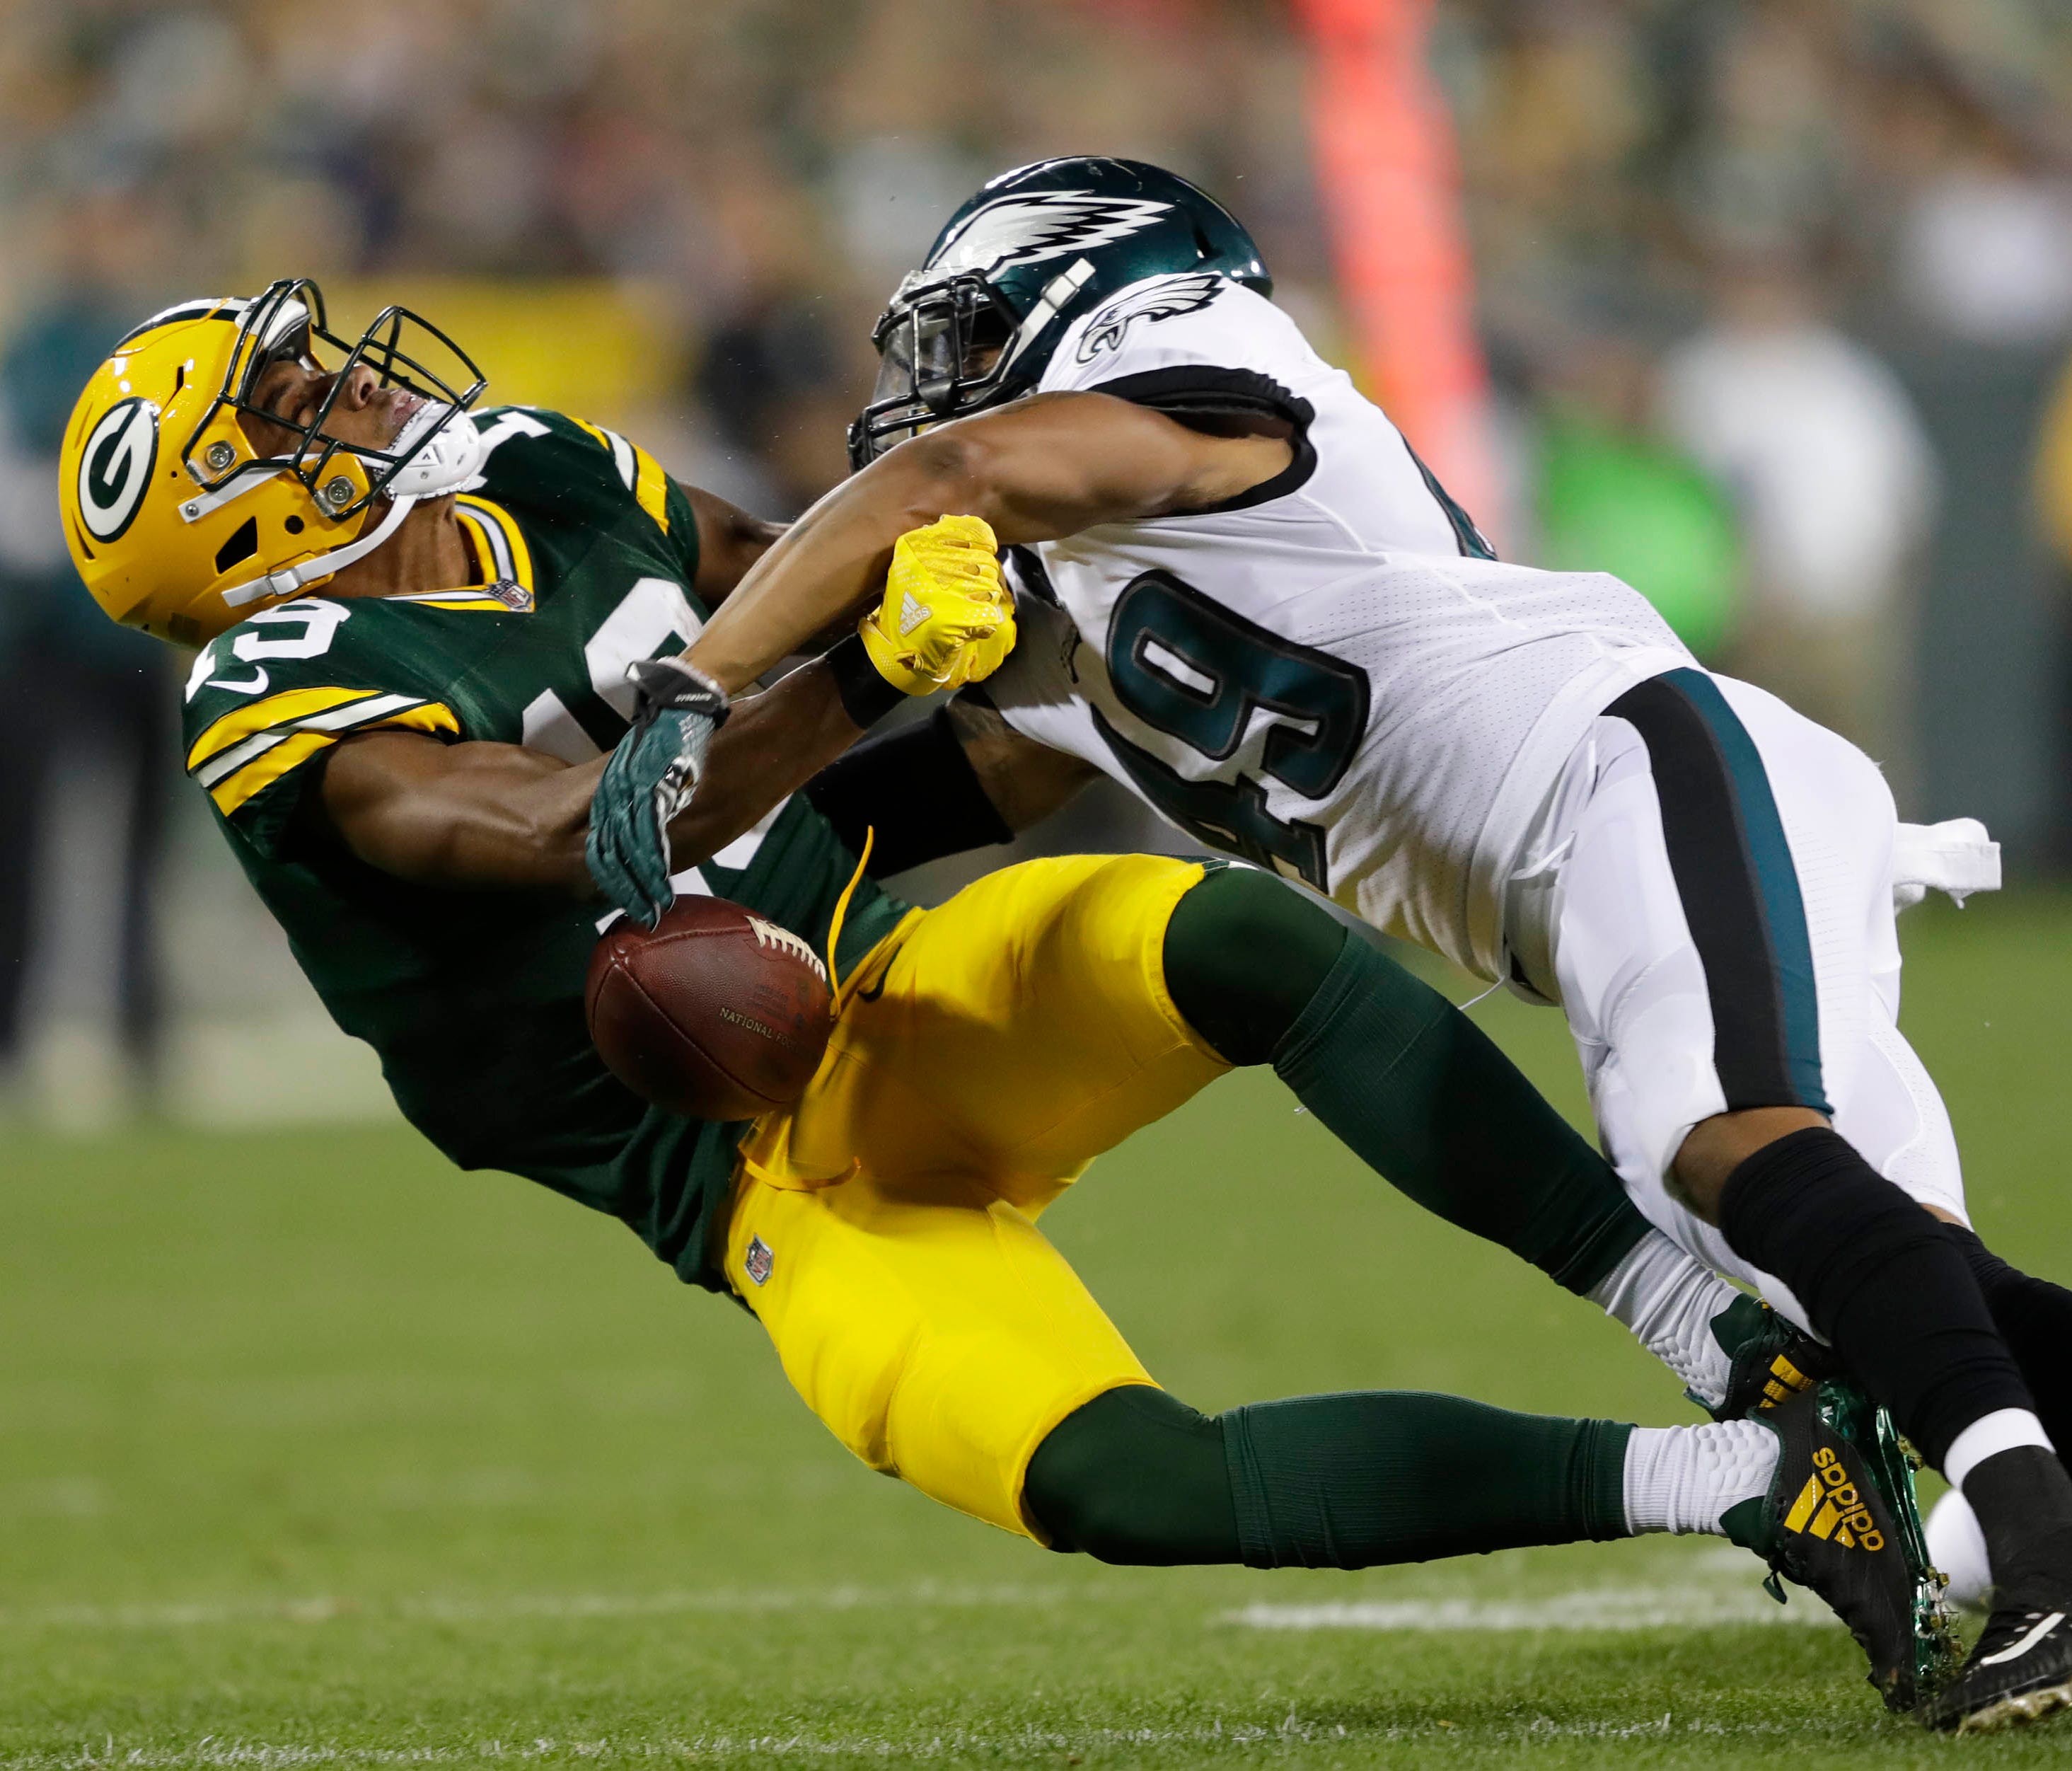 Green Bay Packers wide receiver Malachi Dupre (19) drops the ball as he is hit hard by Philadelphia Eagles defender Tre Sullivan in the second half in a preseason NFL game at Lambeau Field.